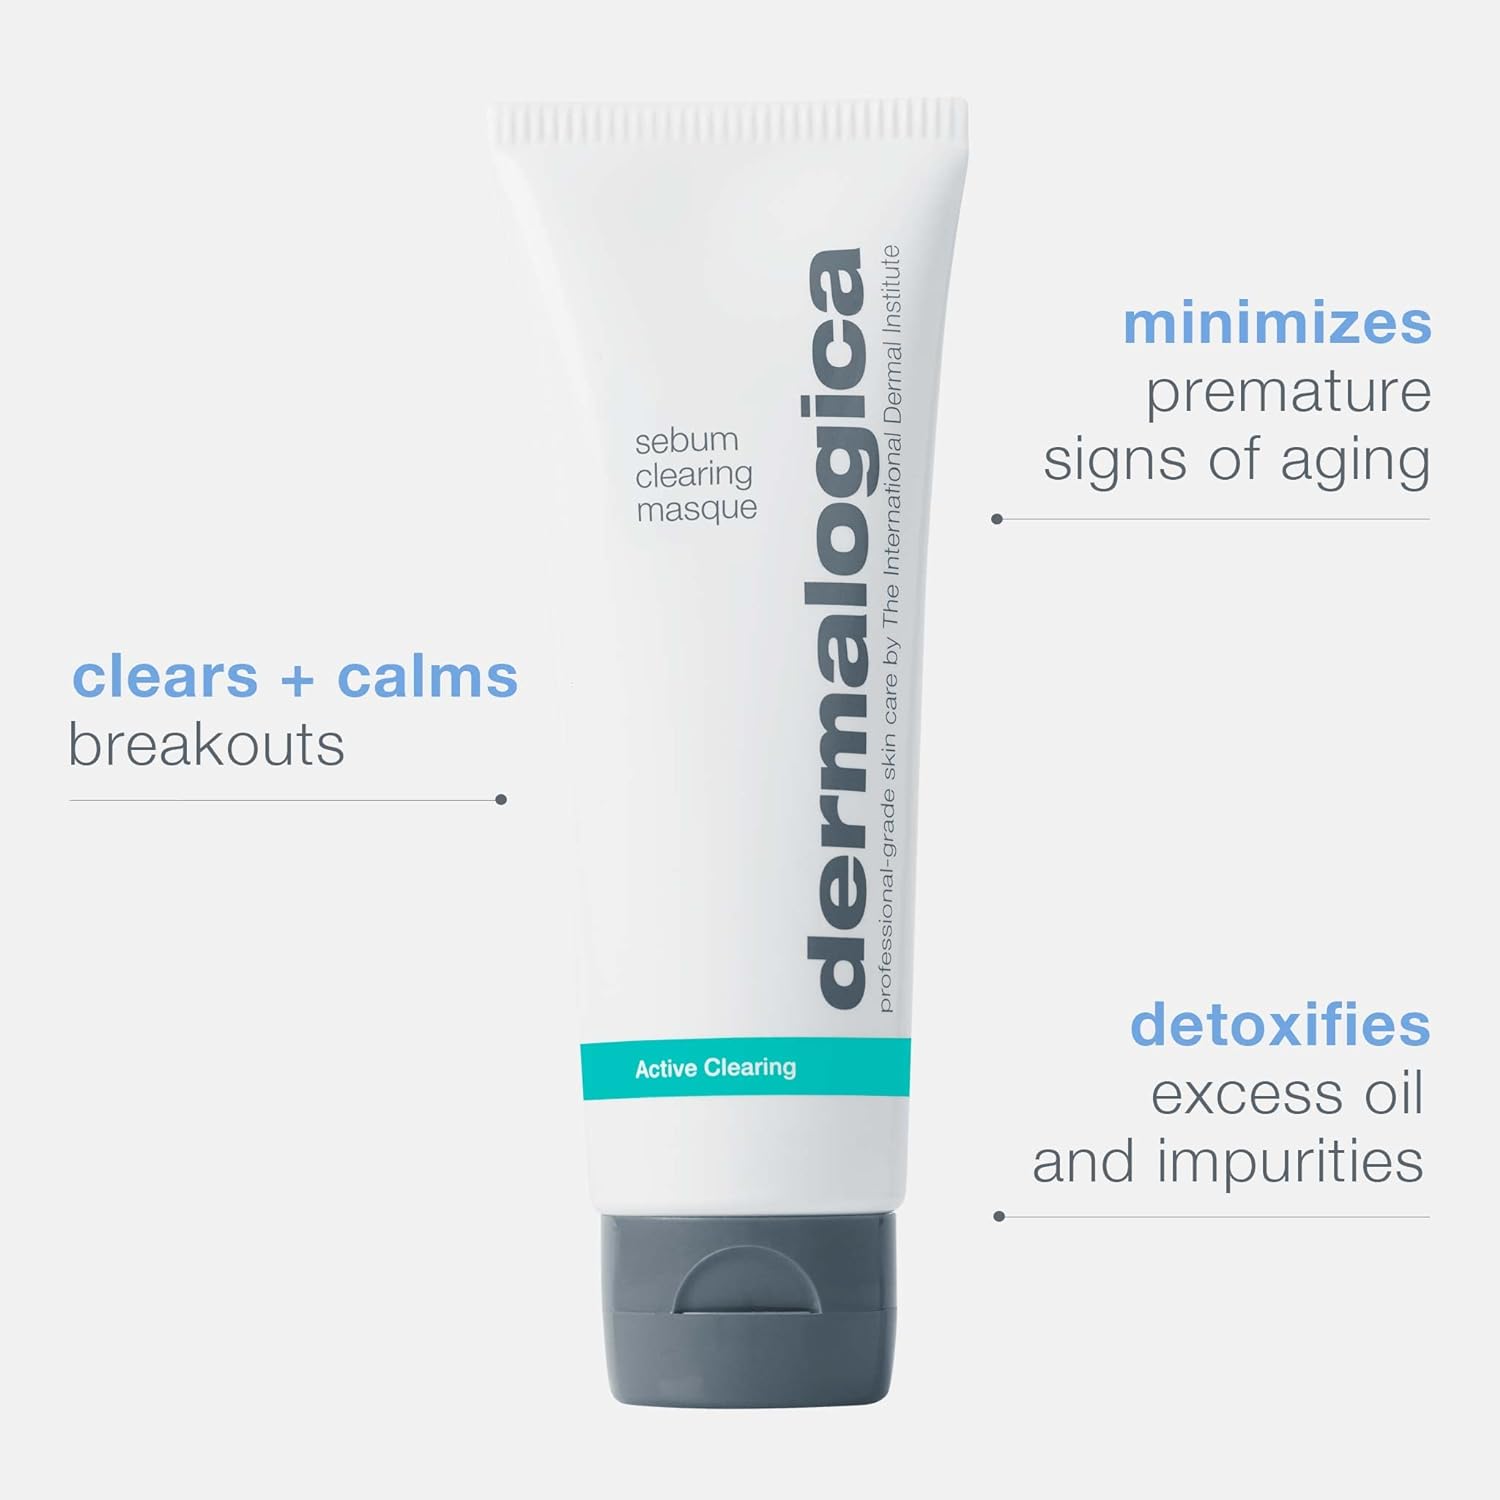 Dermalogica Sebum Clearing Masque (2.5 Fl Oz) - Anti-Aging Clay Face Mask with Salicylic Acid - Absorbs Excess Oils To Soothe and Refine Skin Texture